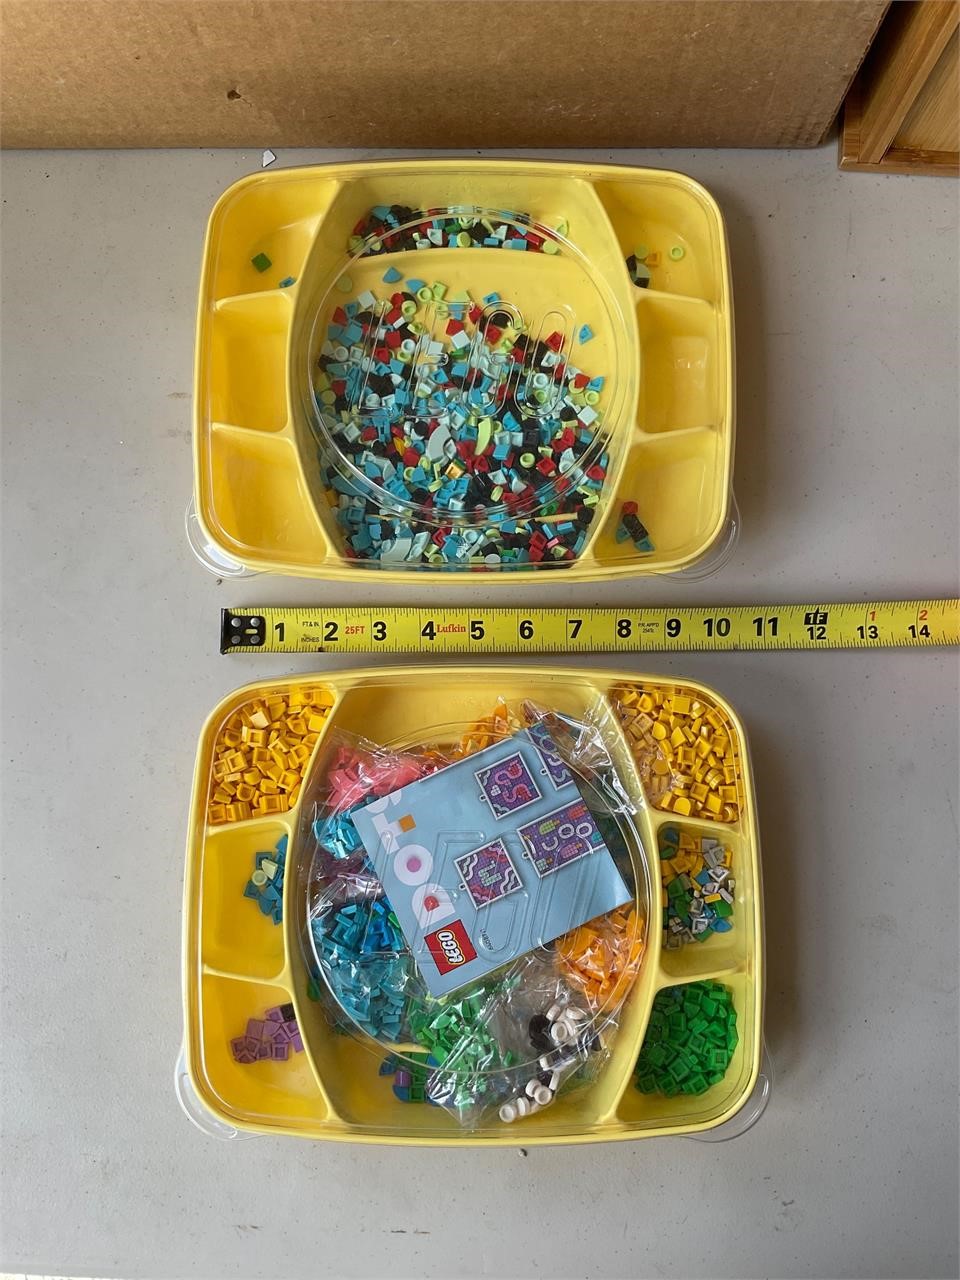 Two containers of Lego dots